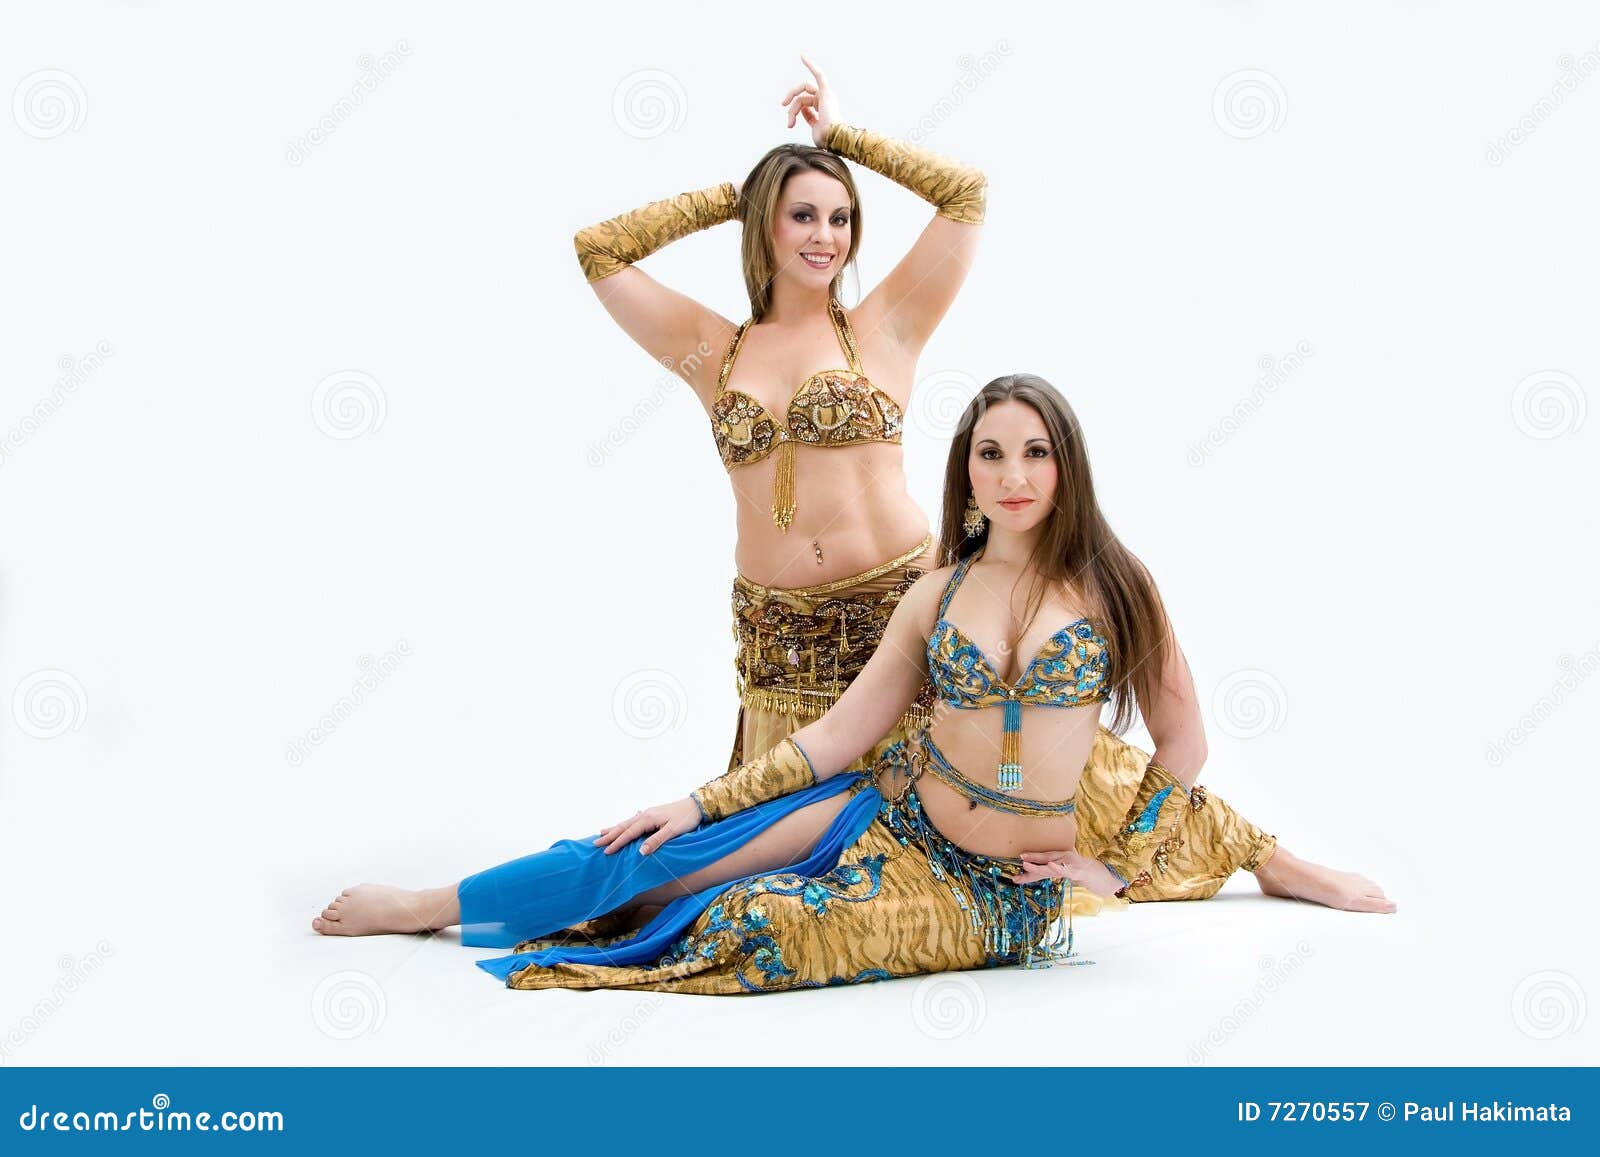 Amazon.com: Cardio Bellydance Workout, with Melissa: Belly Dance fitness, Belly  dance workout classes, Belly dance how-to : Melissa: Movies & TV